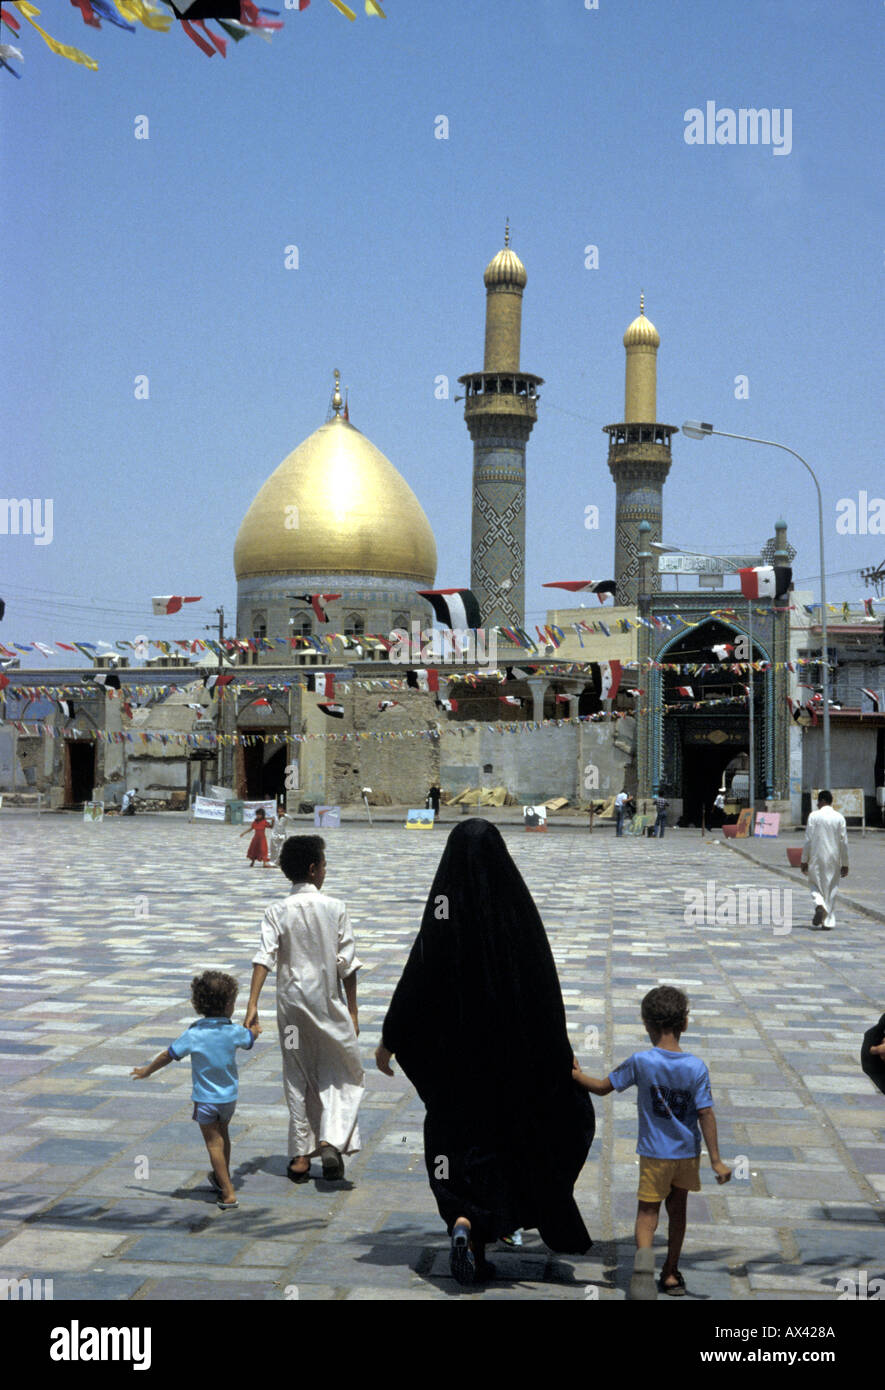 The Al-Abbas Shrine is the mausoleum of Abbas ibn Ali and a mosque, located near the Imam Husayn Mosque in Karbala, Iraq Stock Photo